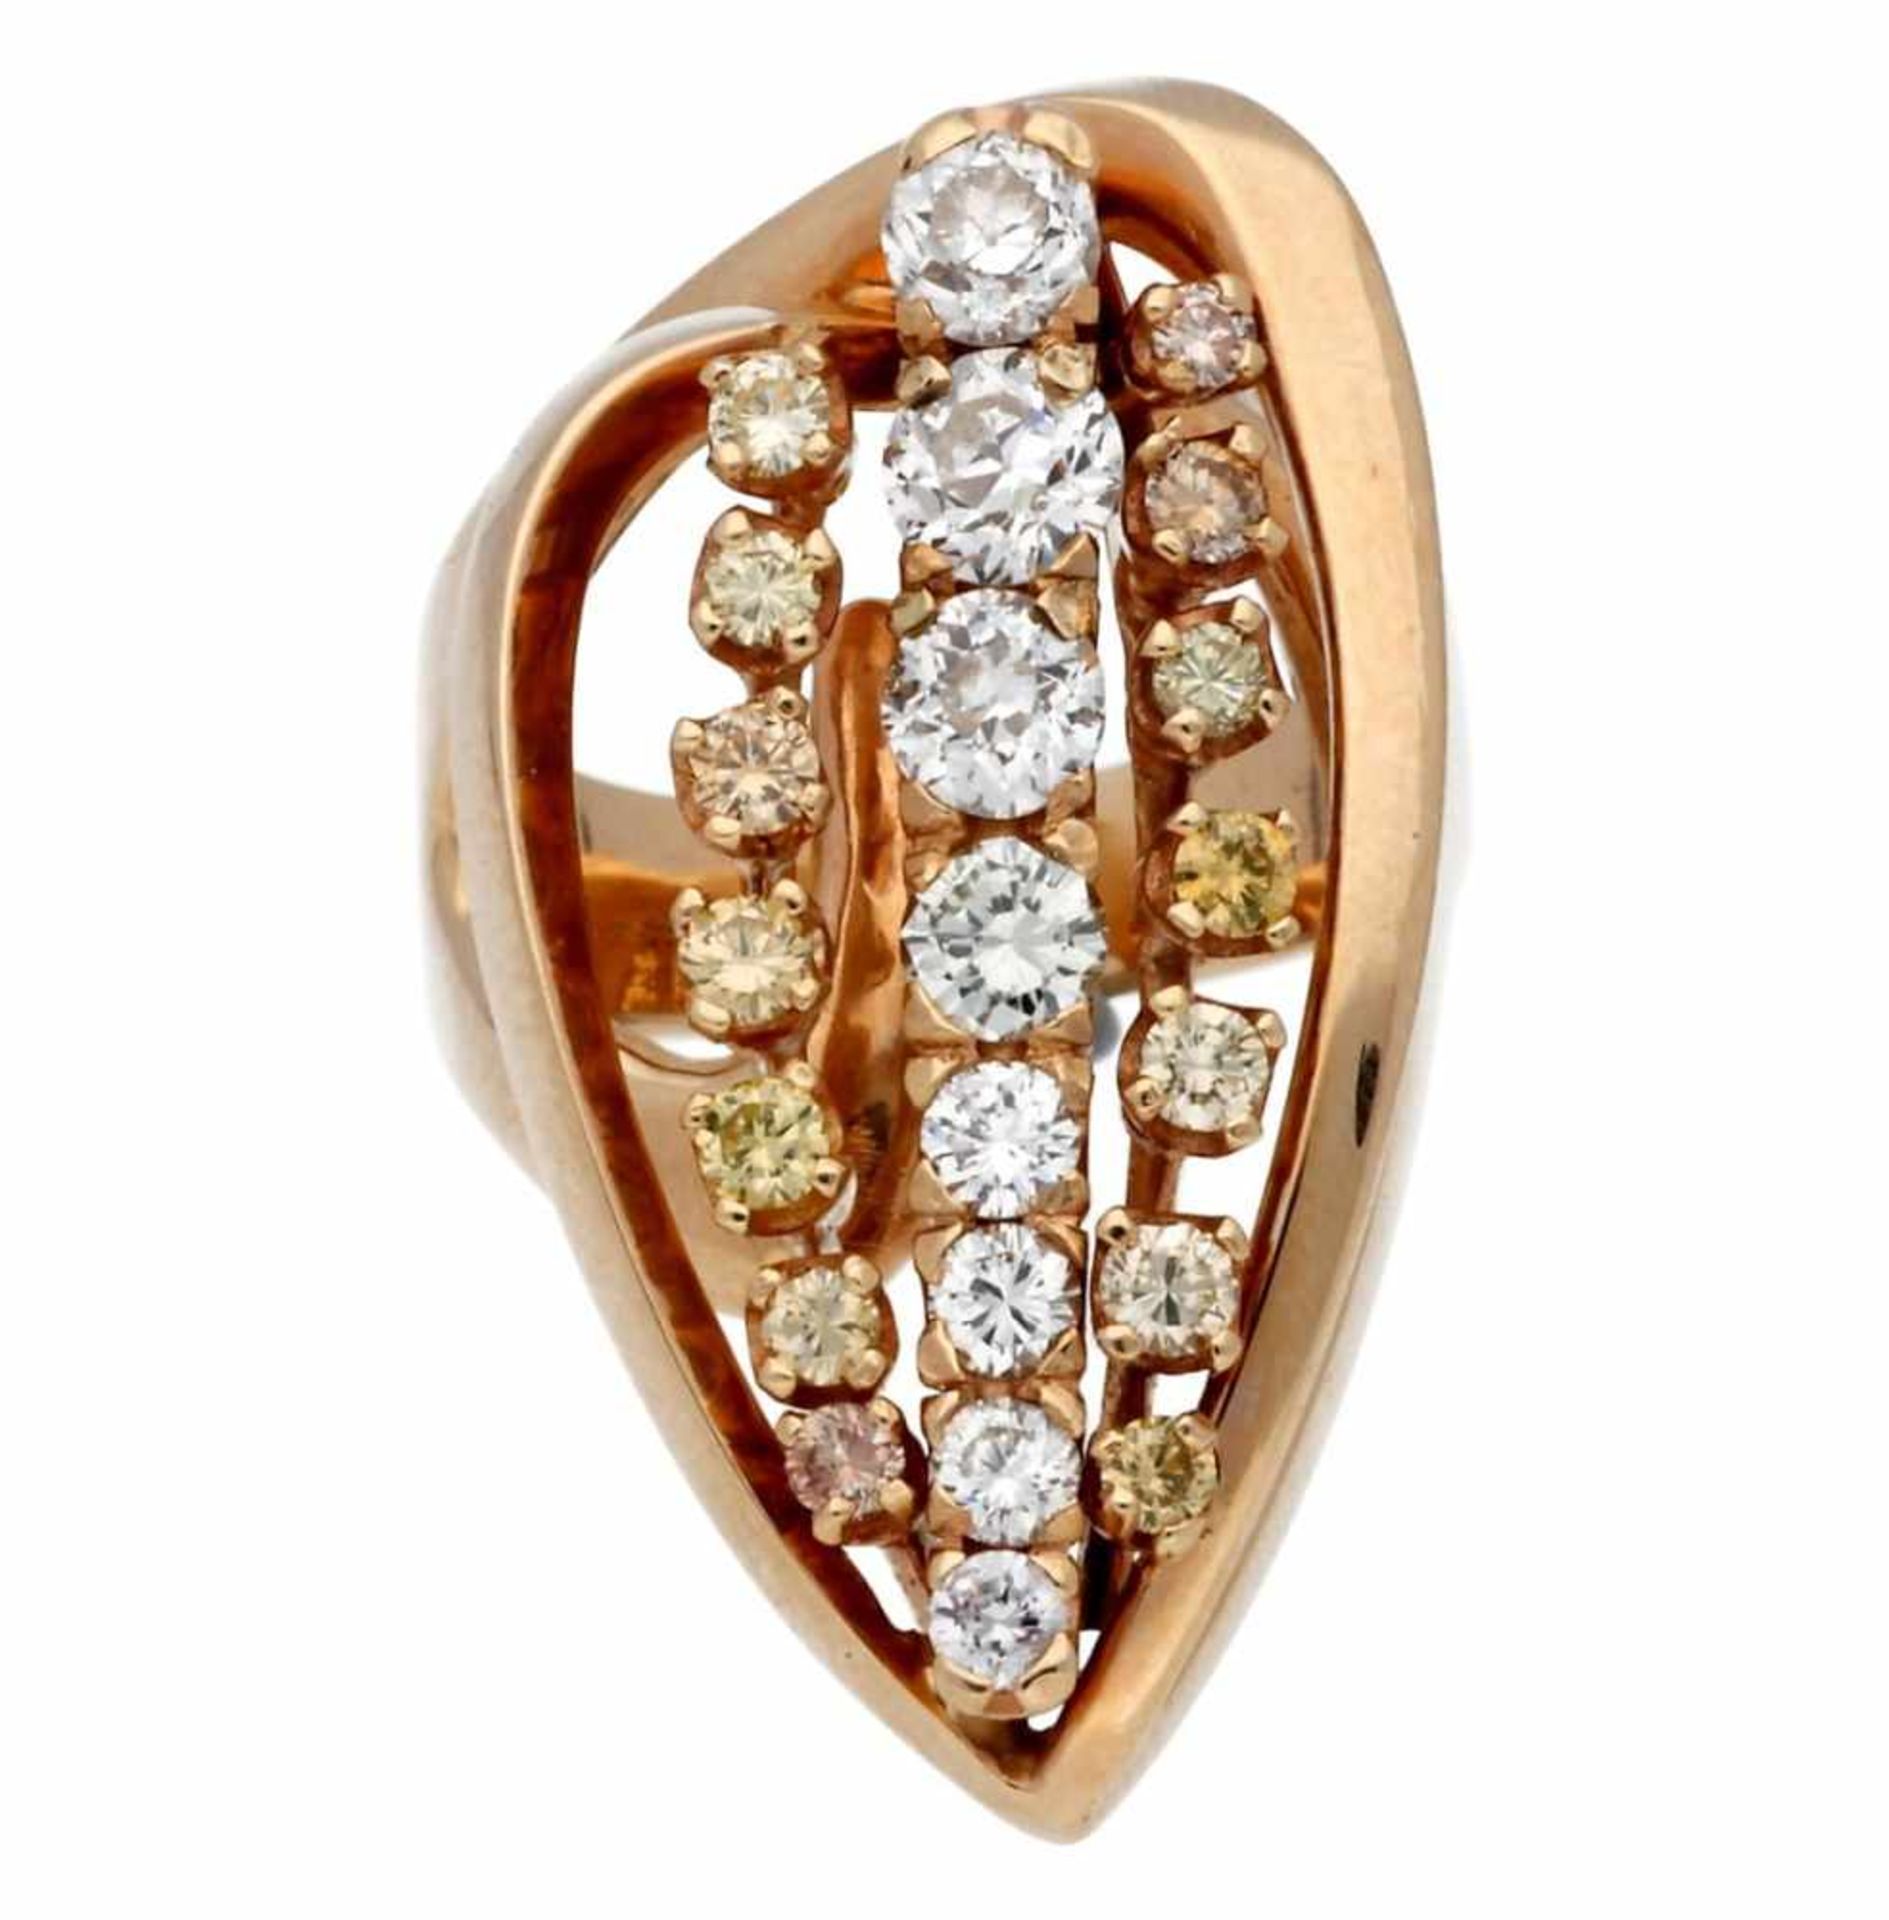 Diamonds leaf-shaped ring.14K gold and brilliant and old brilliant cut diamonds, 2.05 cts. 19.7 gr.